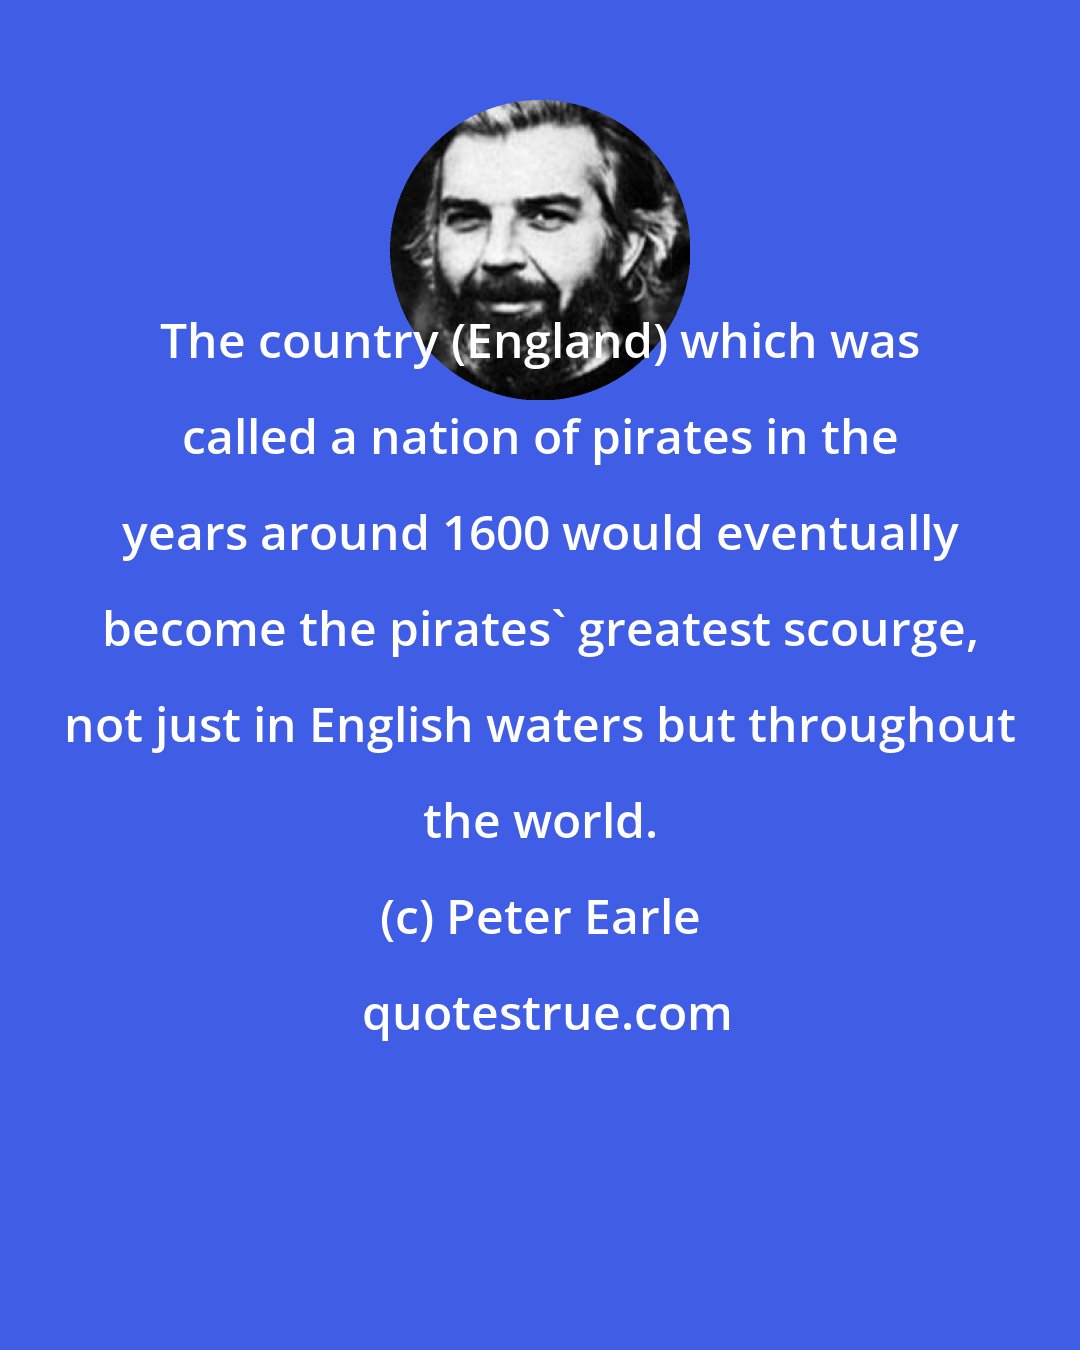 Peter Earle: The country (England) which was called a nation of pirates in the years around 1600 would eventually become the pirates' greatest scourge, not just in English waters but throughout the world.